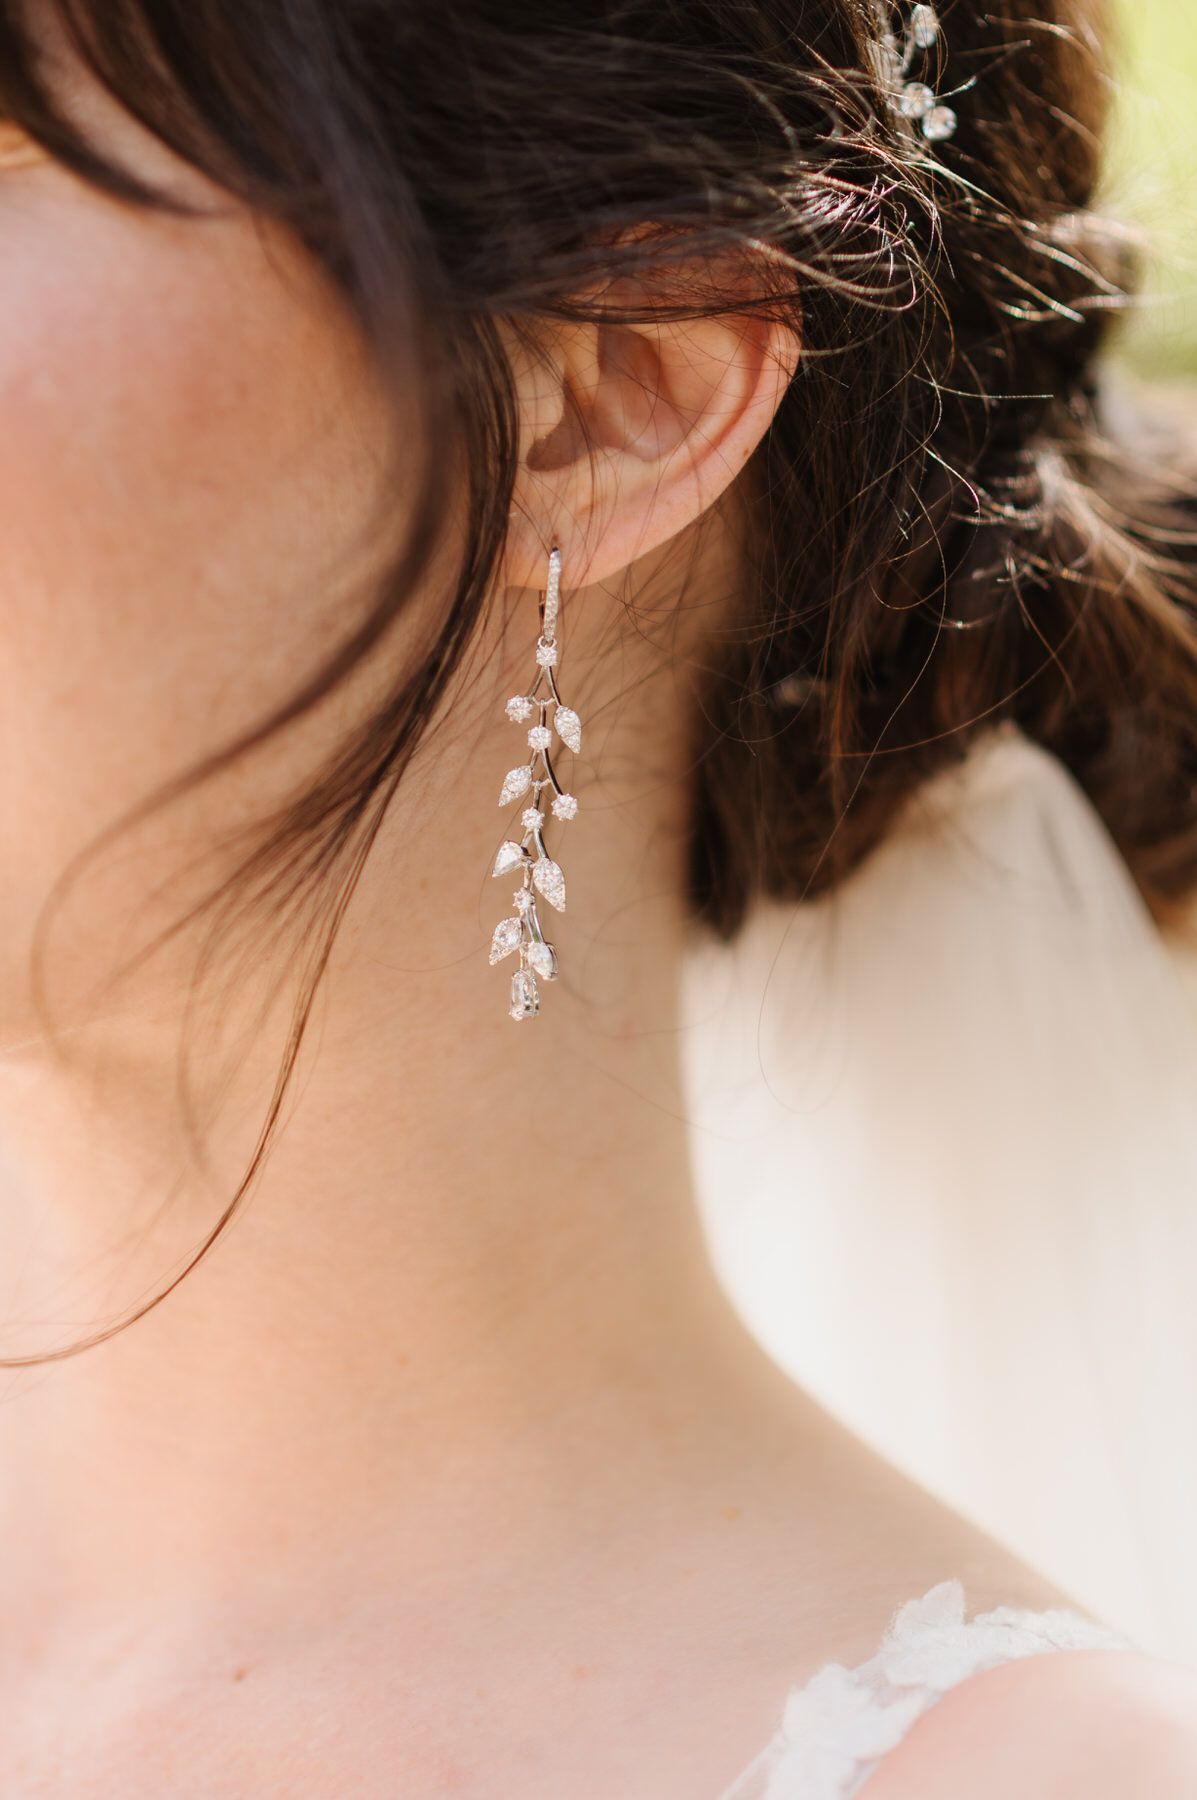 A close up of a woman wearing a pair of earrings.